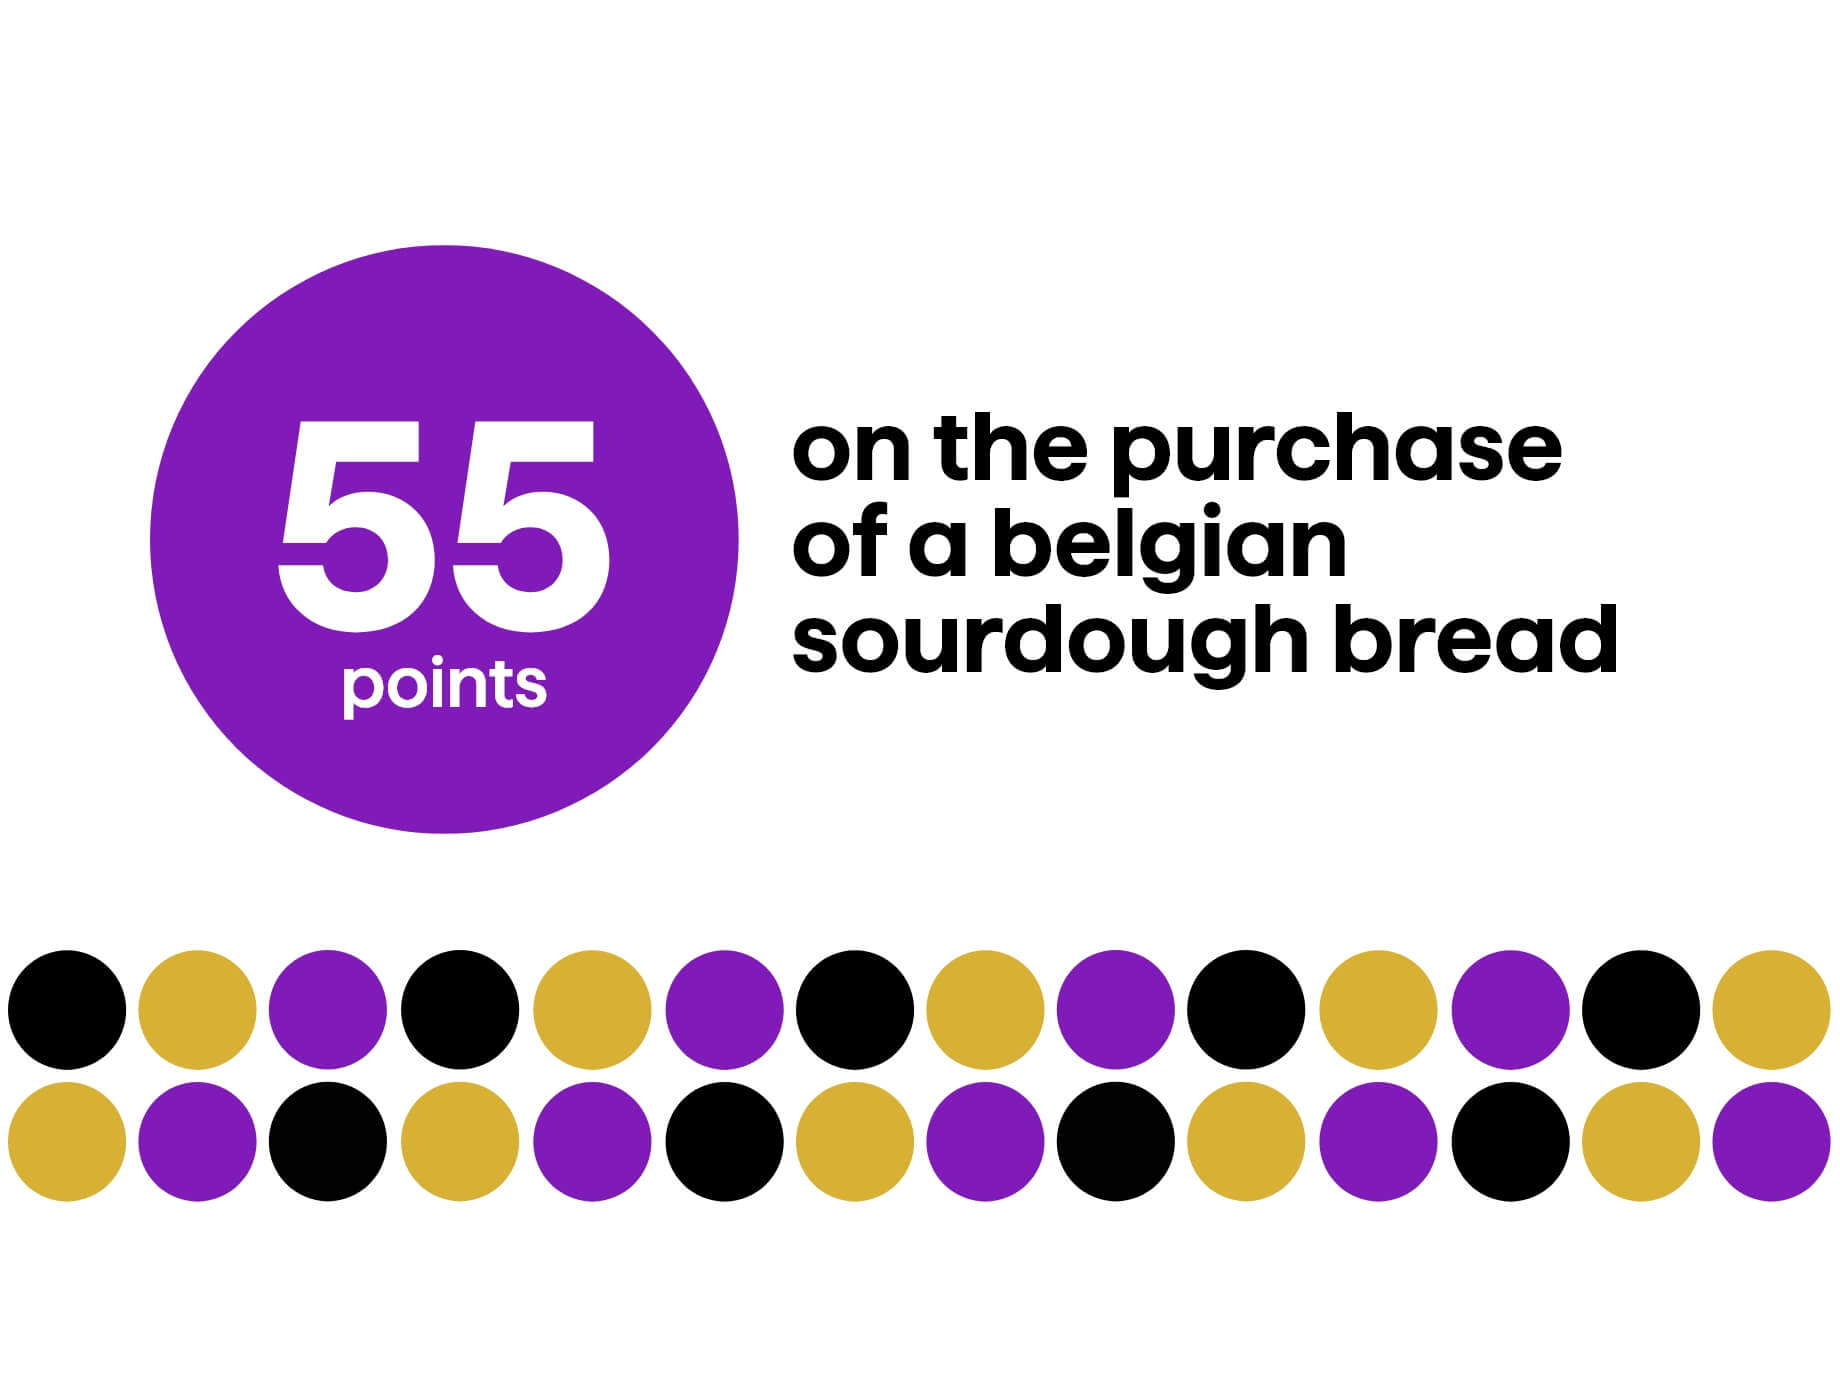 55 points on the purchase of a belgian sourdough bread